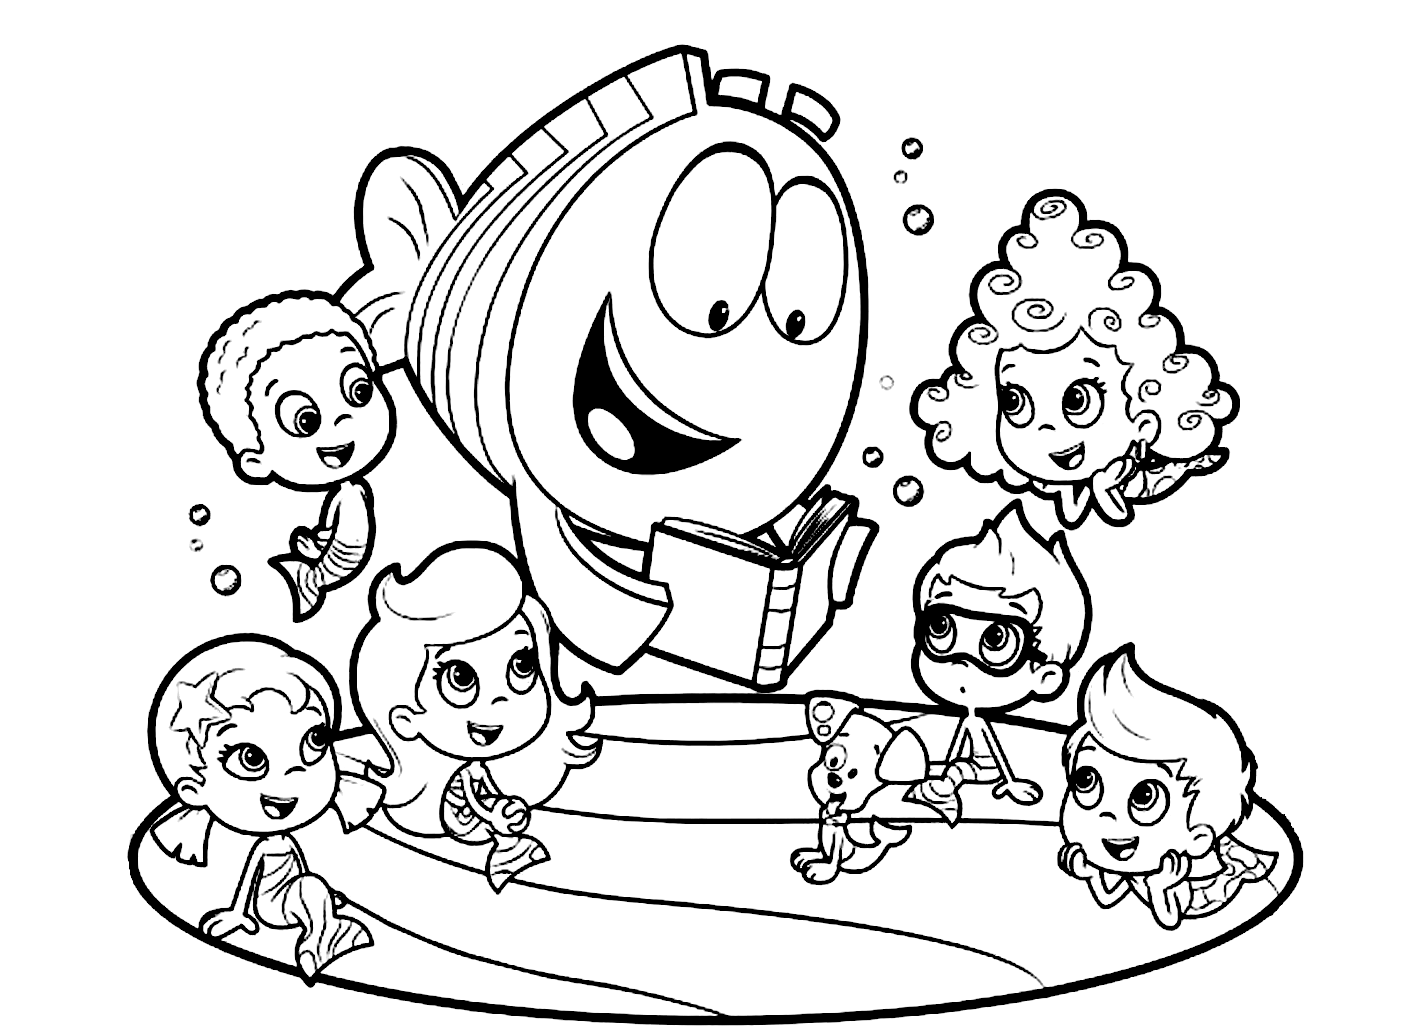 Printable Coloring Page of Bubble Guppies Learning Underwater with Mr Grouper